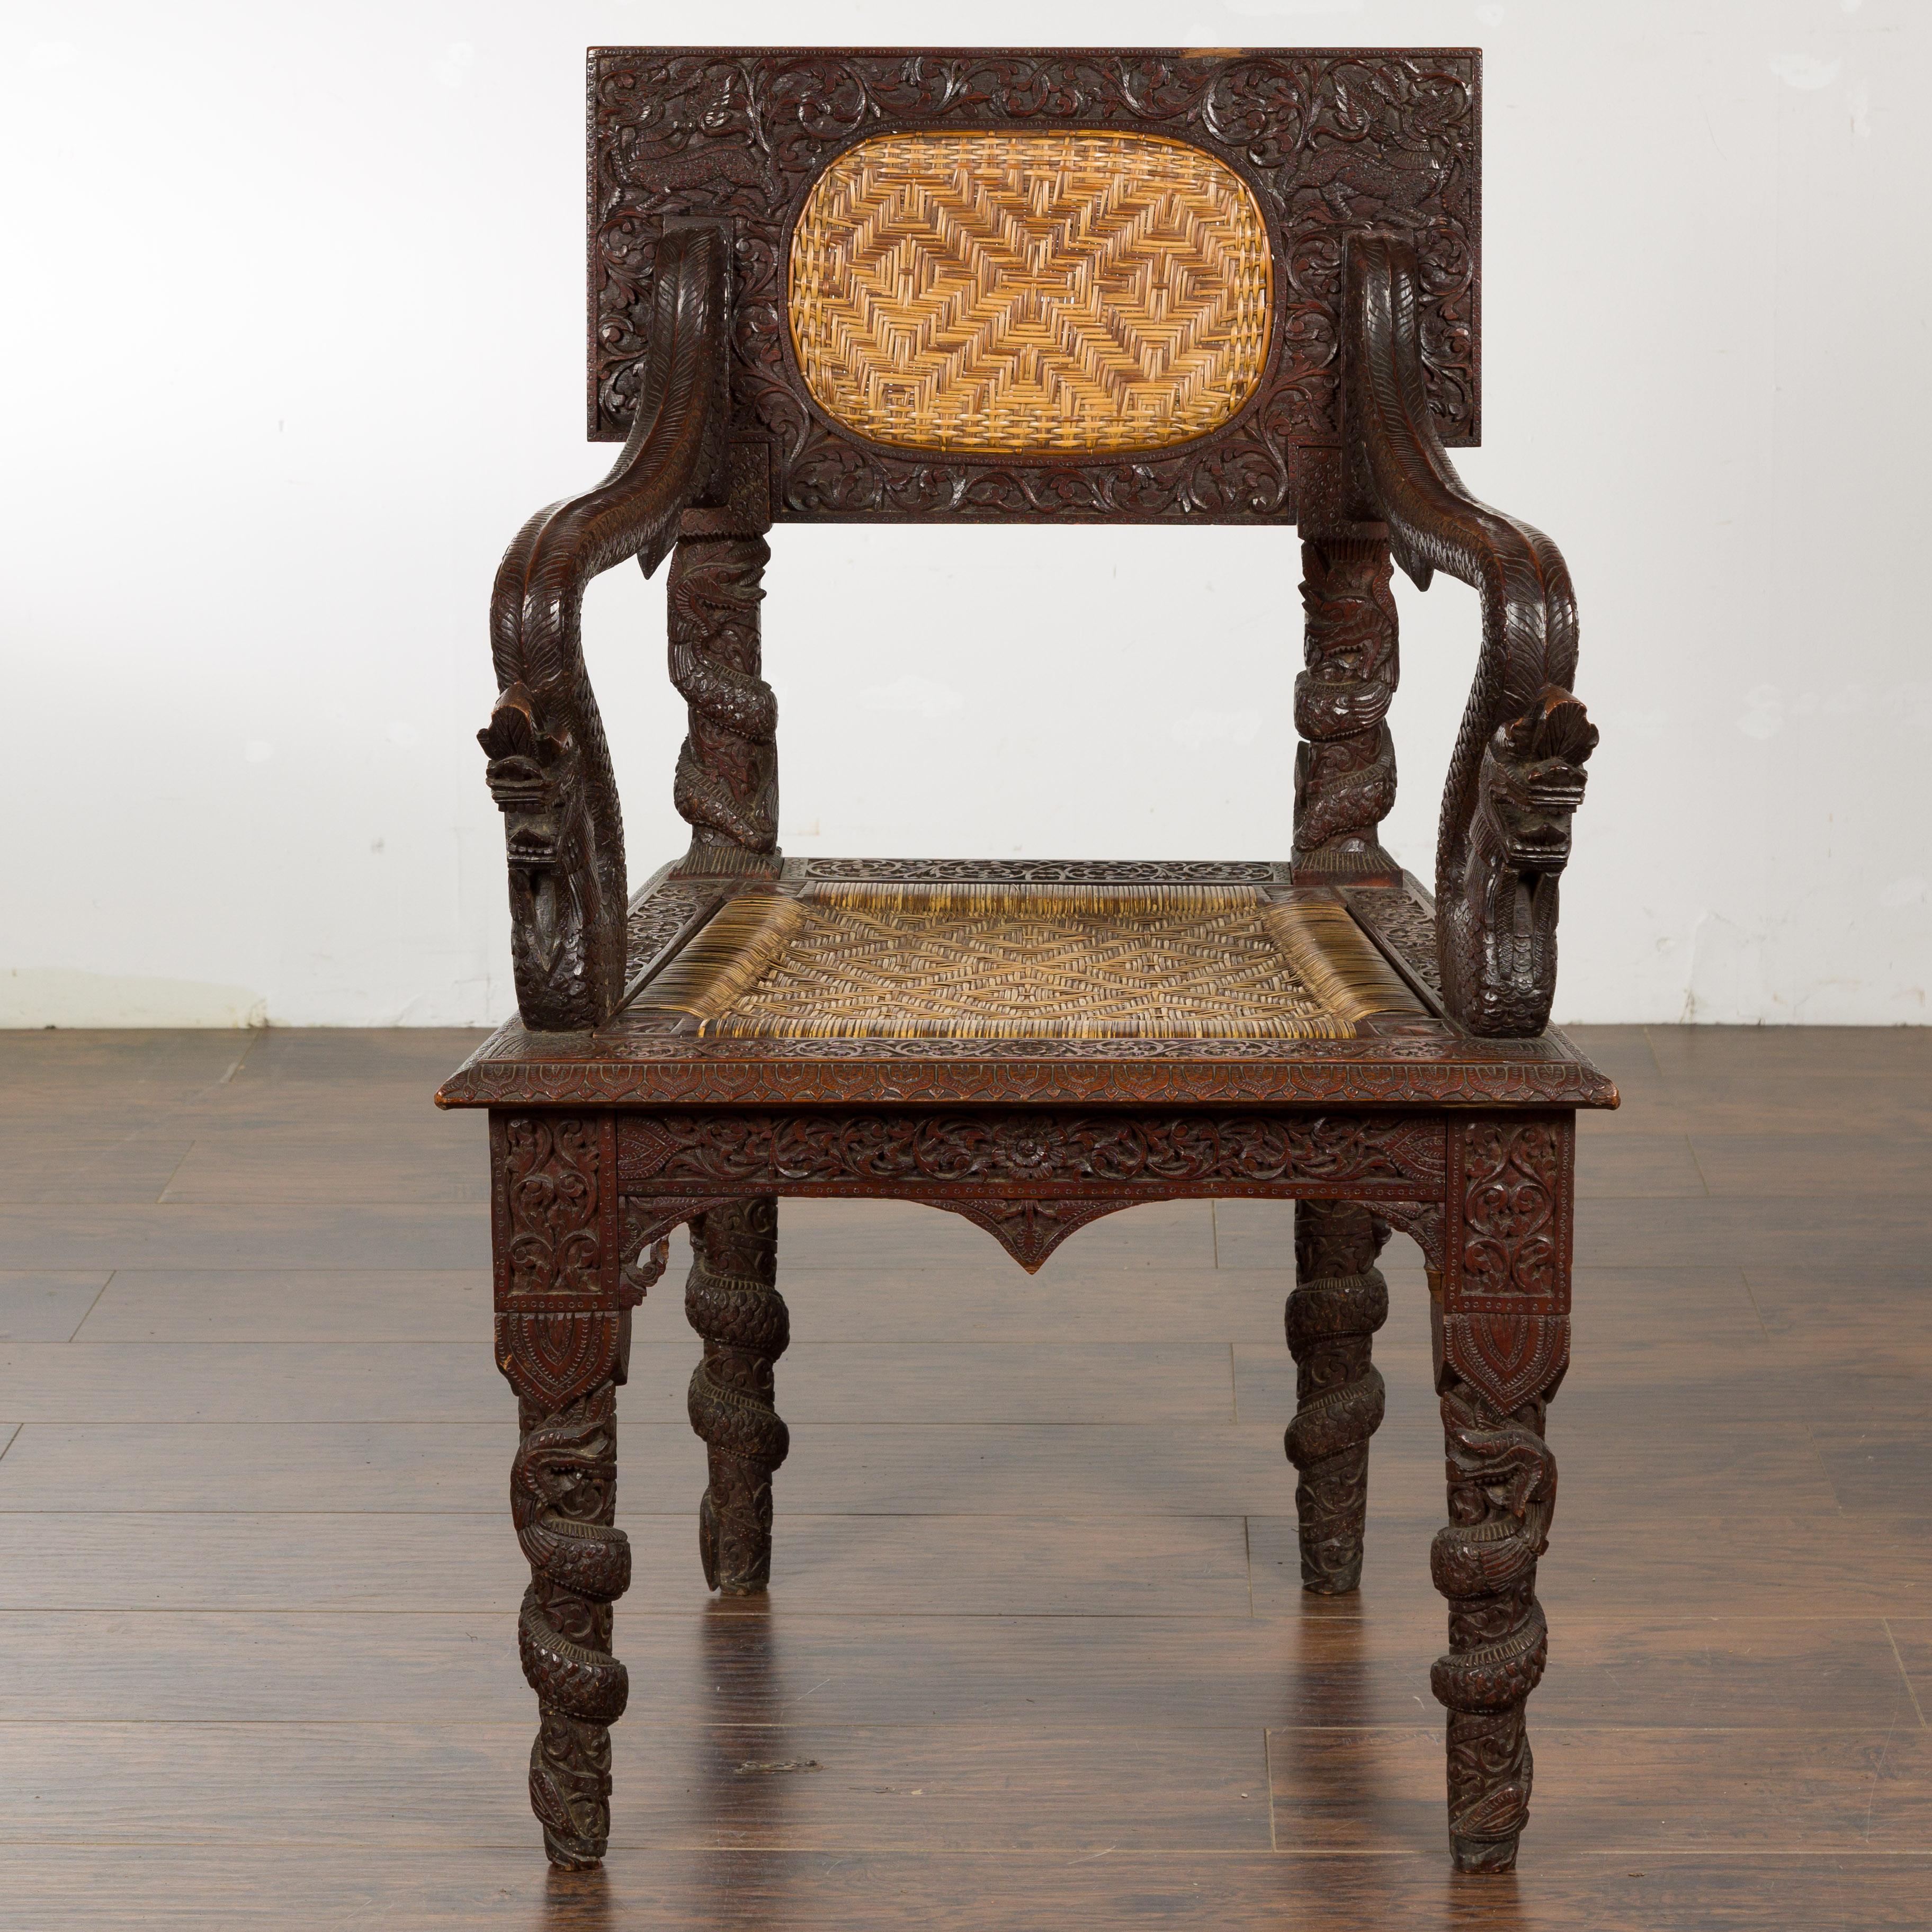 An Anglo-Indian carved wooden armchair from circa 1900 with carved back and mythical creatures on the arms. This magnificent Anglo-Indian carved wooden armchair, dating from circa 1900, is a striking blend of intricate craftsmanship and storytelling